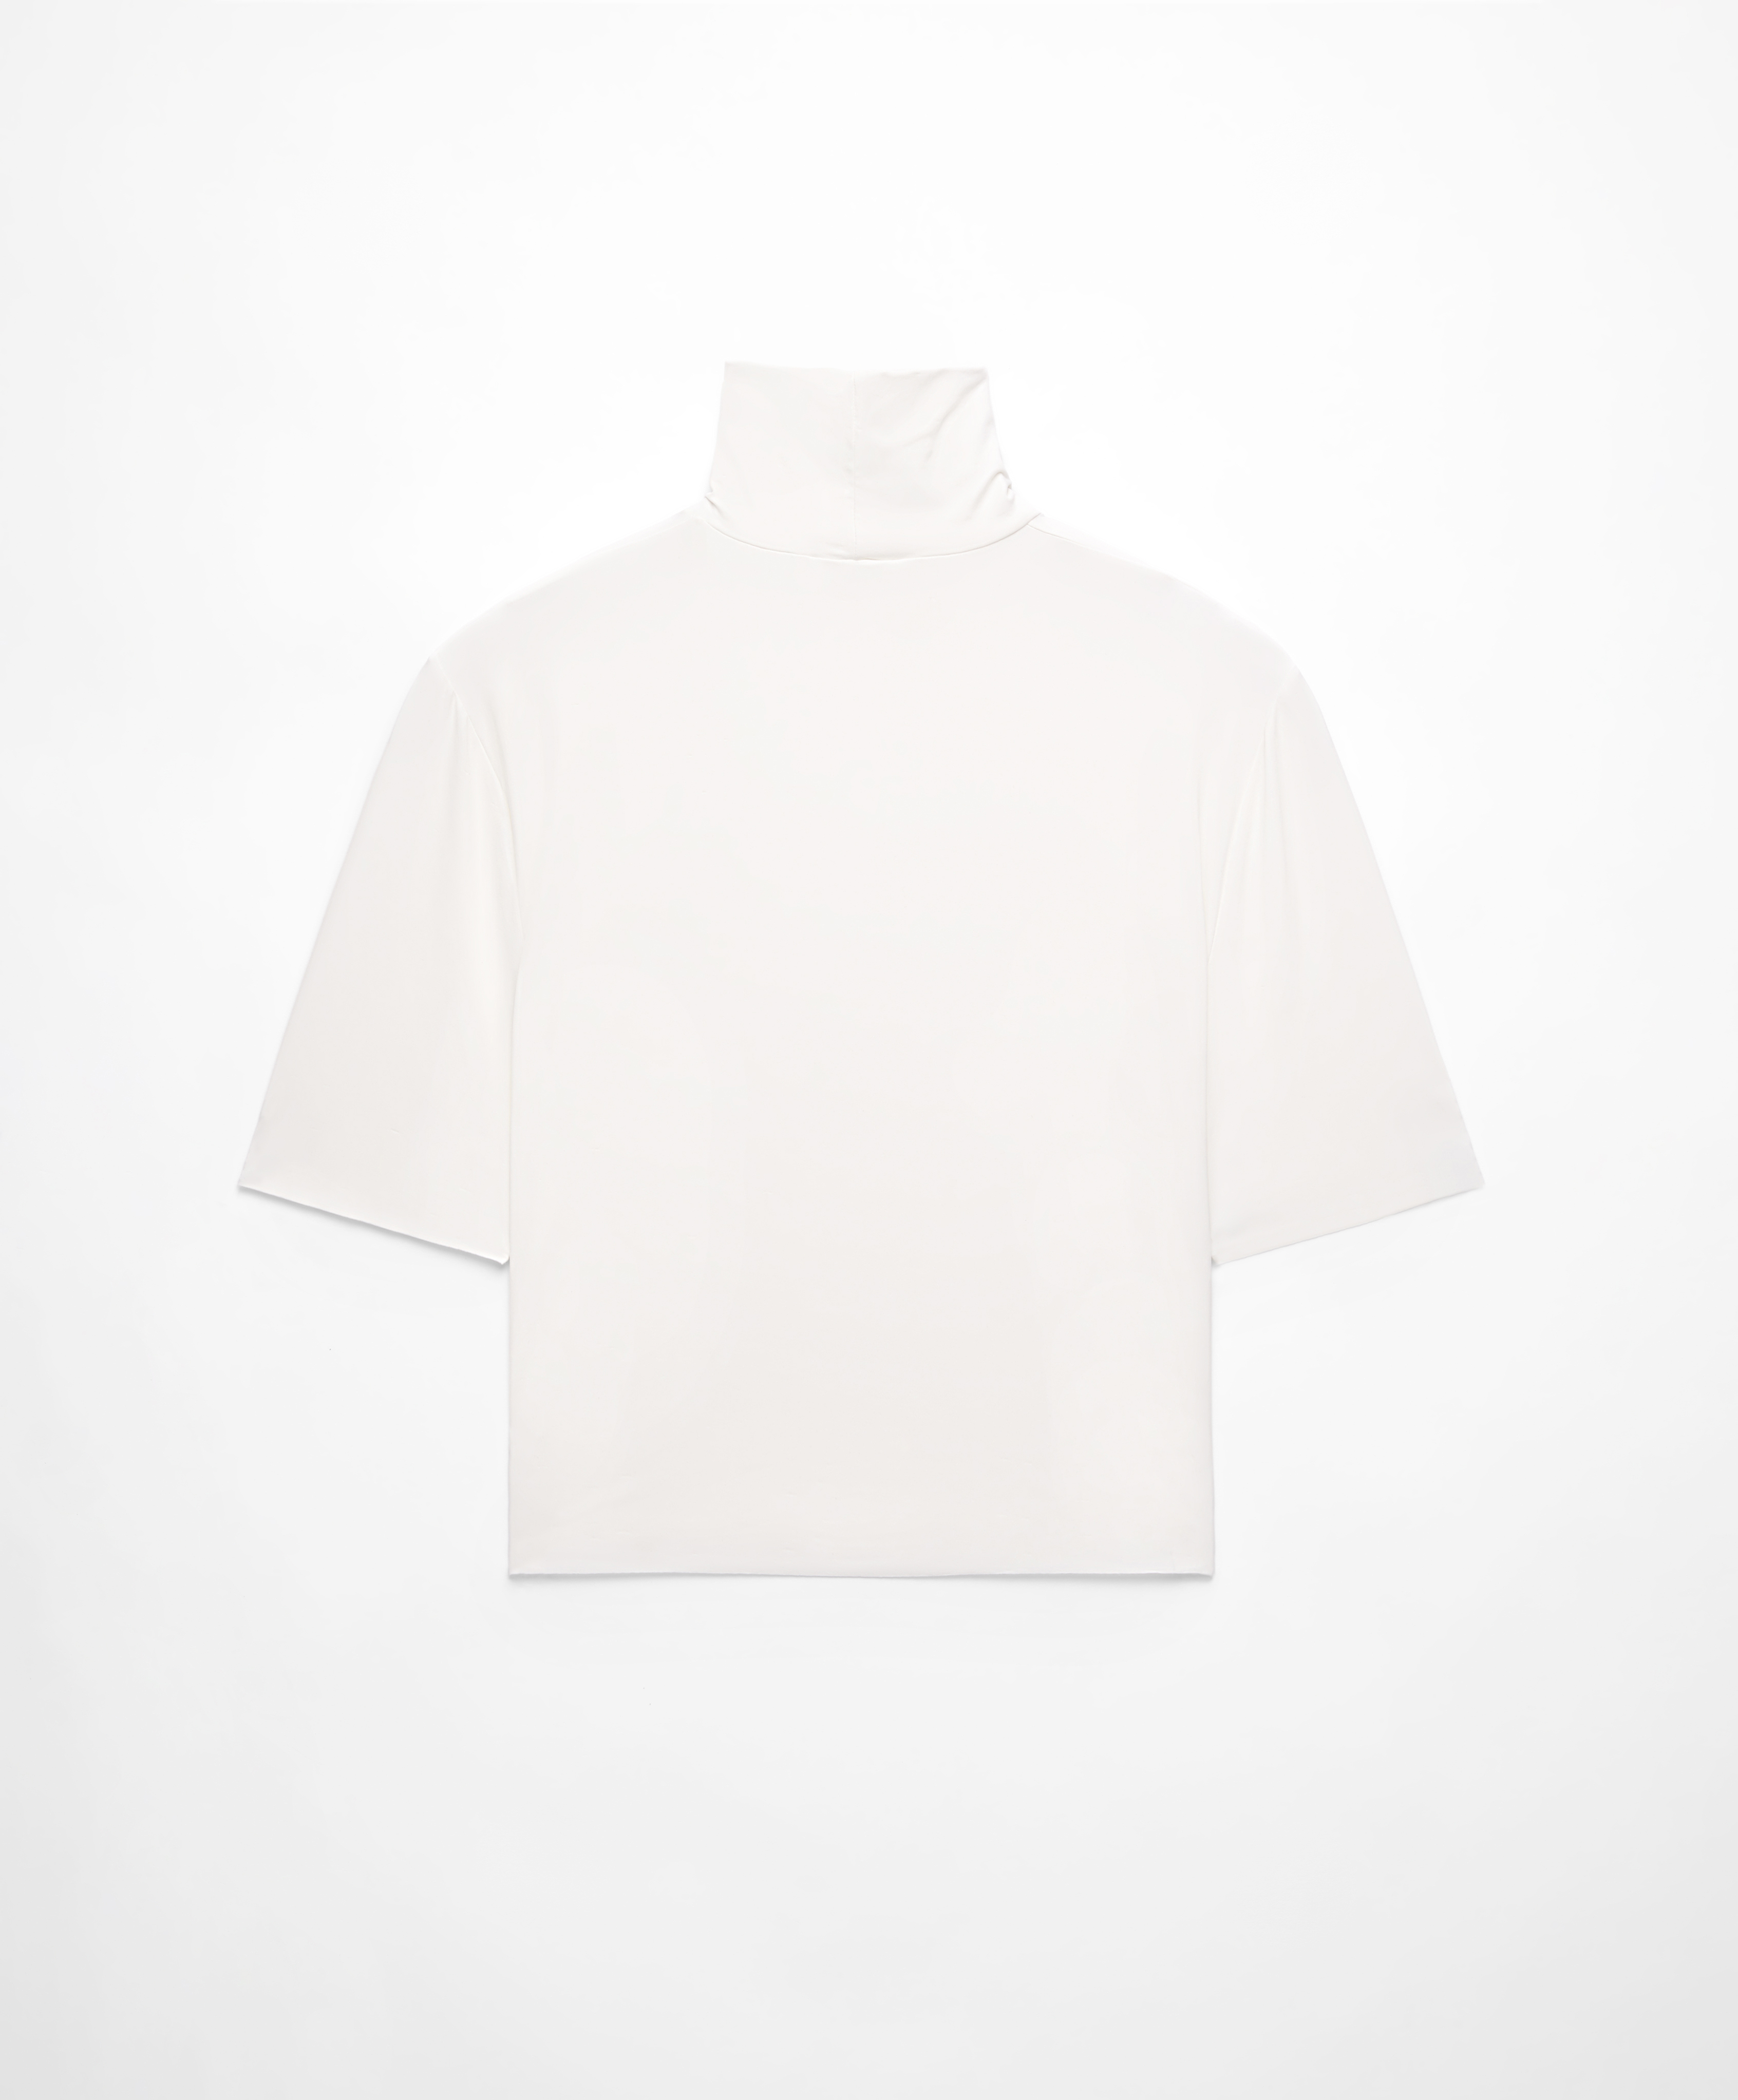 Cropped T-shirt with raised neck